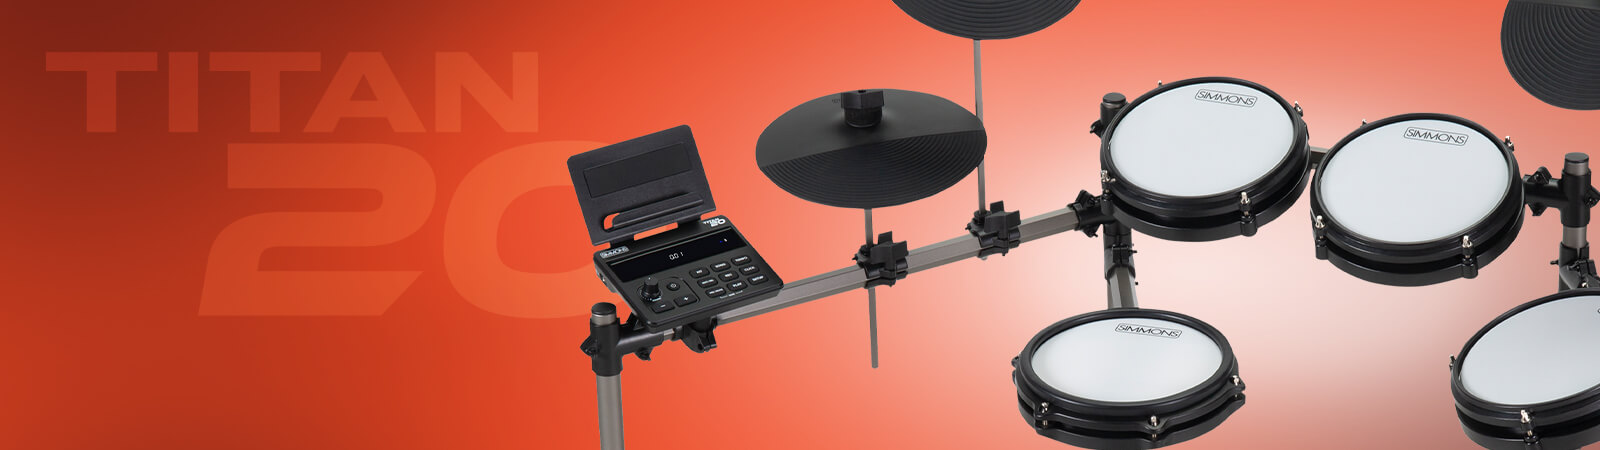 Titan 20 electronic drum kit toms, snare, and cymbals on an orange fade background